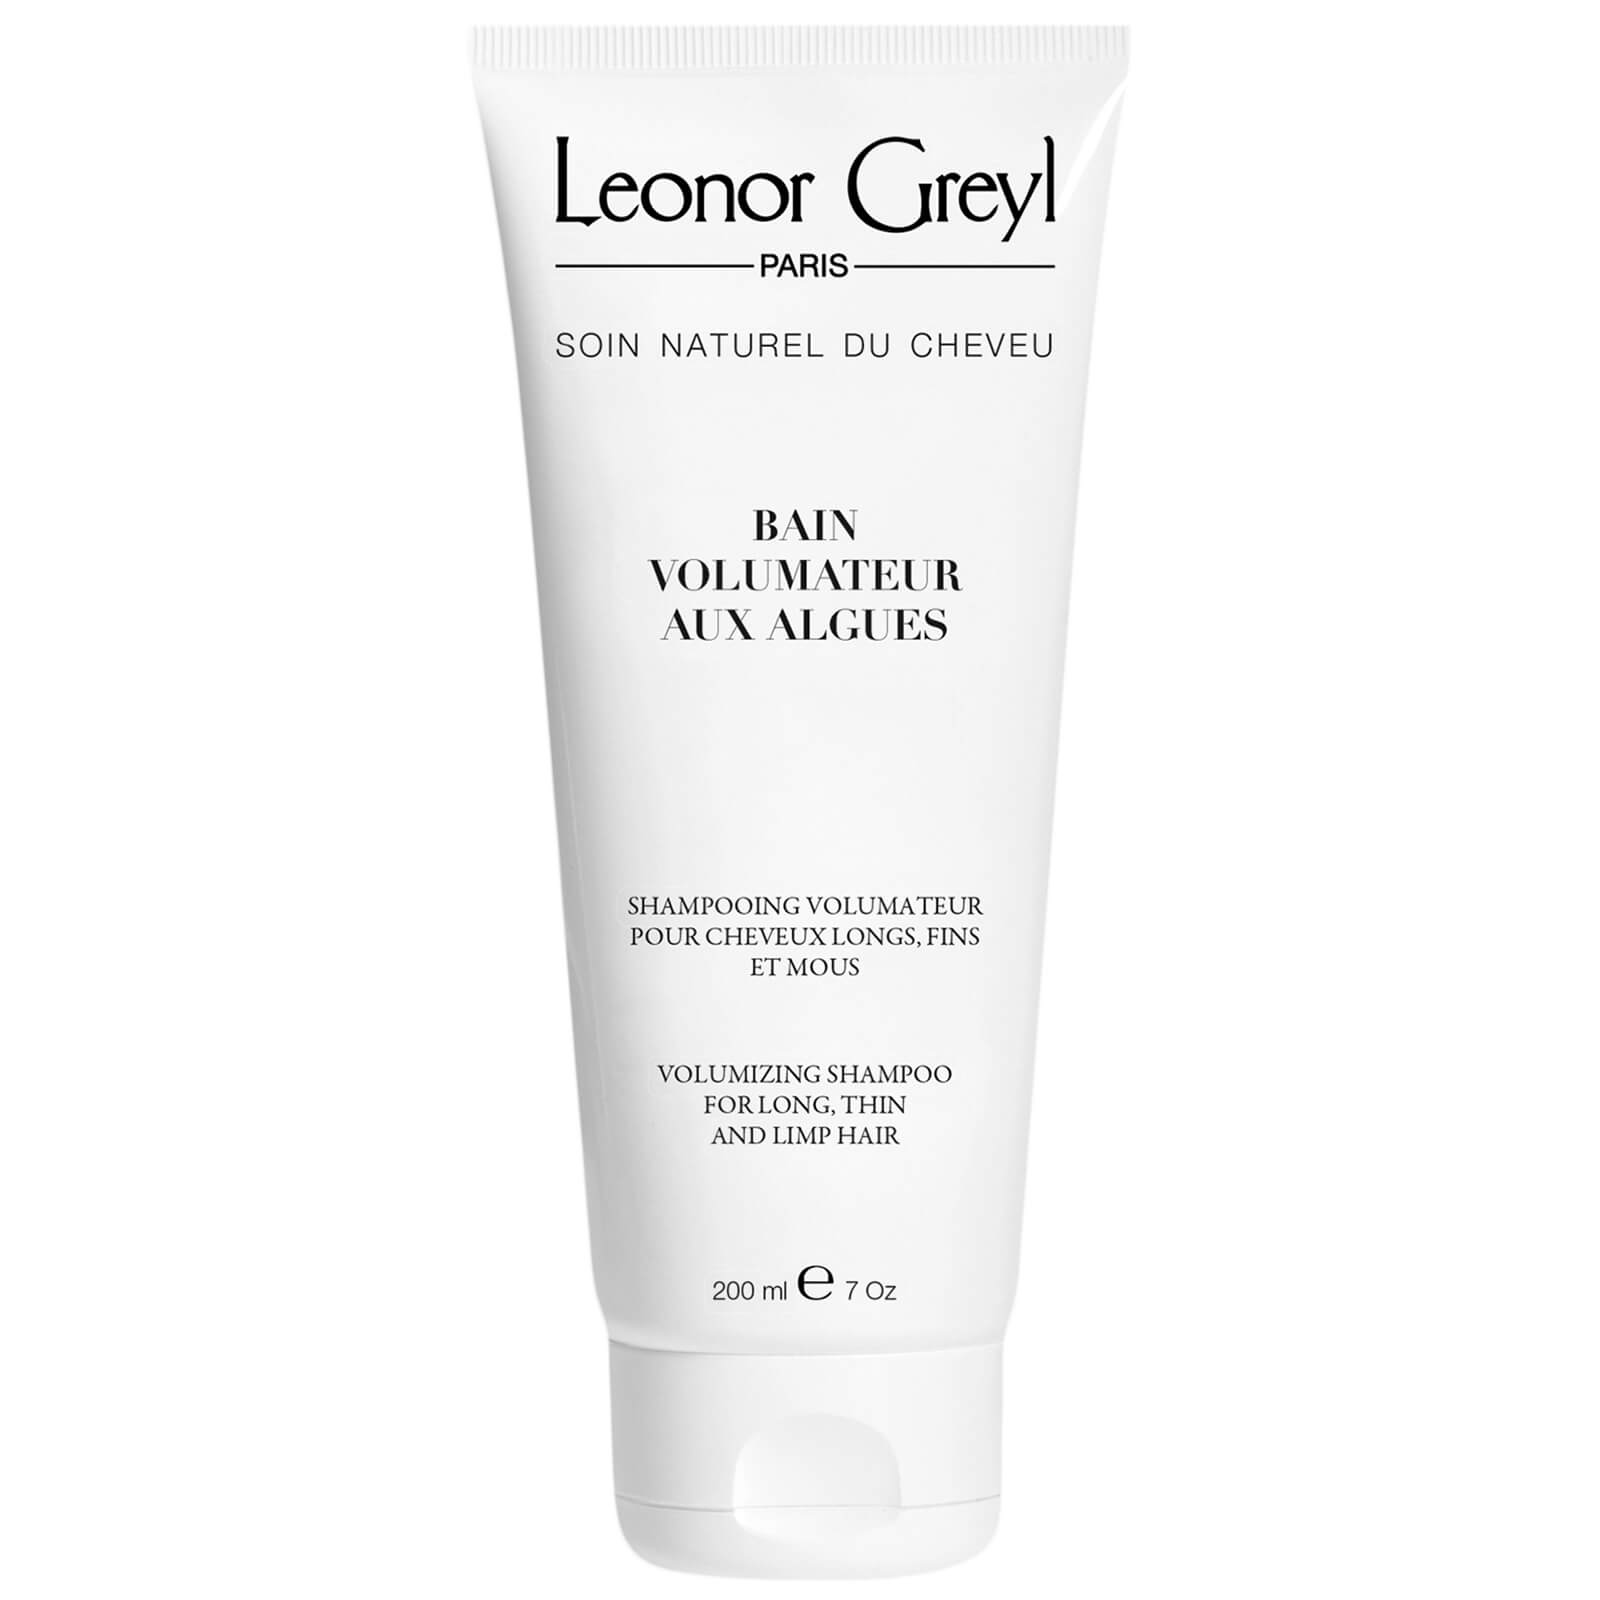 Leonor Greyl Bain Volumateur Aux Algues Specific Conditioning Shampoo For Thin And Limp Hair